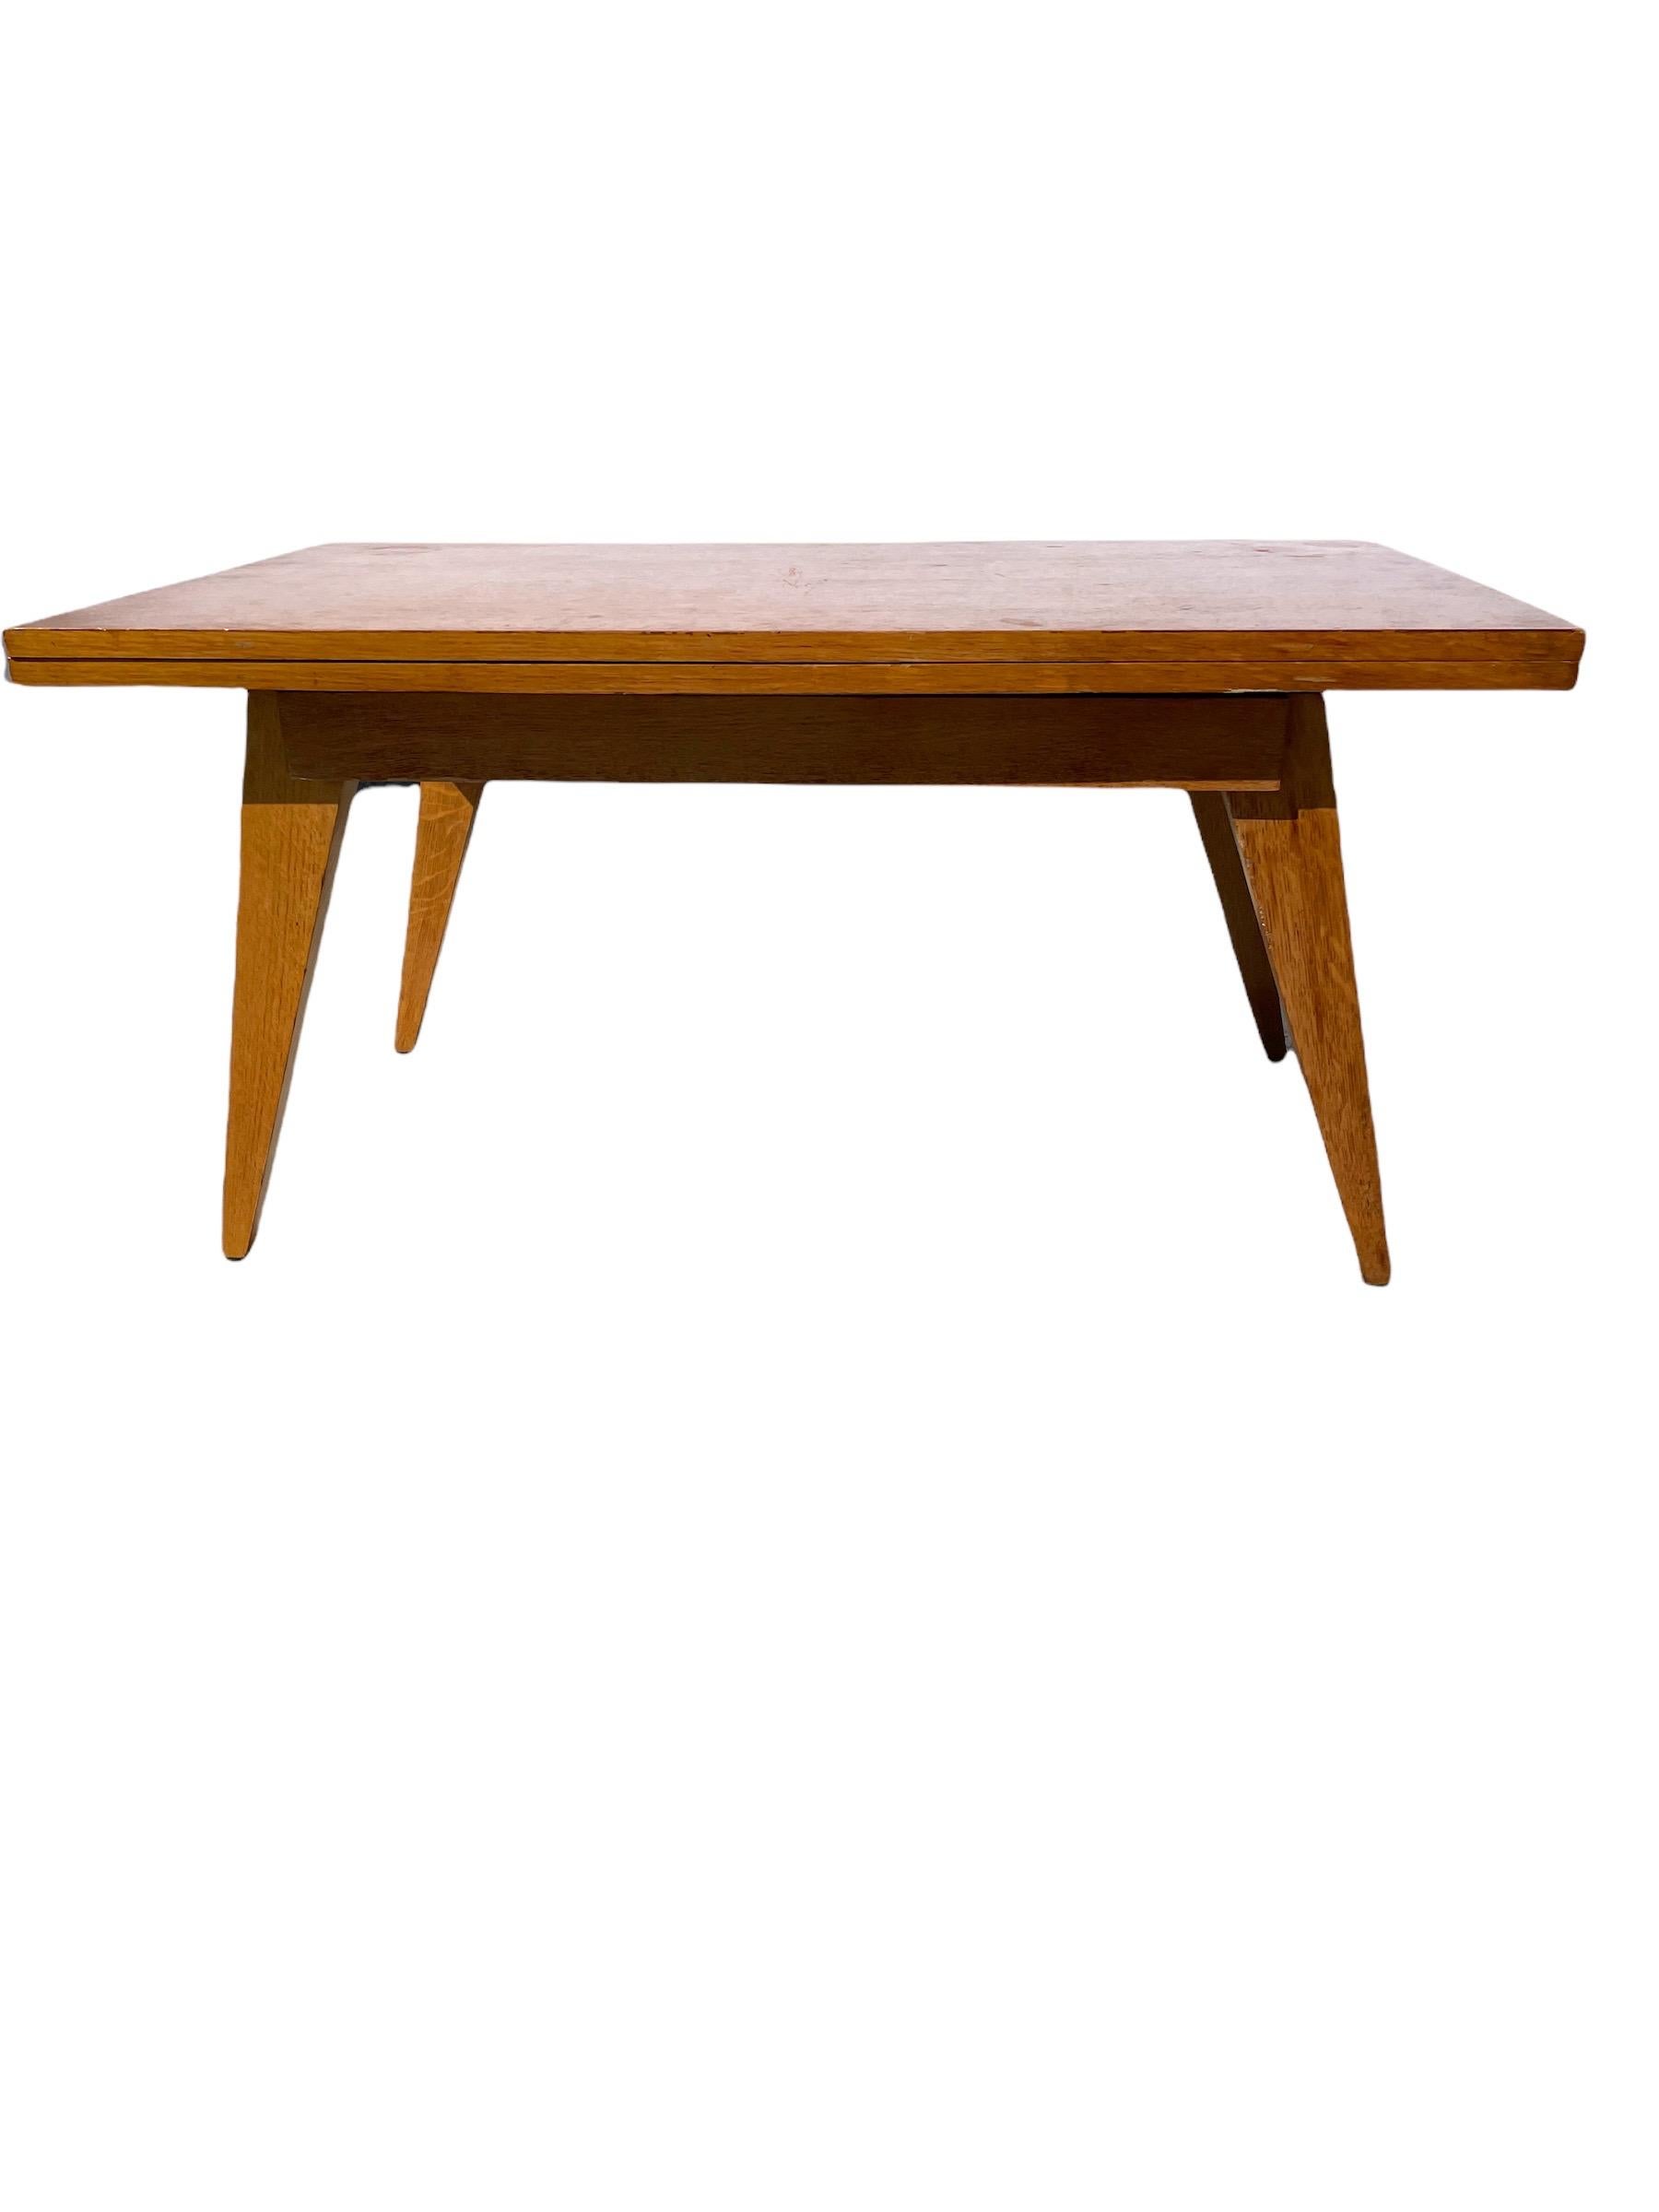 Coffee table in varnished solid wood made in Italy in the 1960s. With a modern design thanks to the legs in equaires. This so-called metamorphic table, transformed by an ingenious system into a dining table that can accommodate up to eight guests.